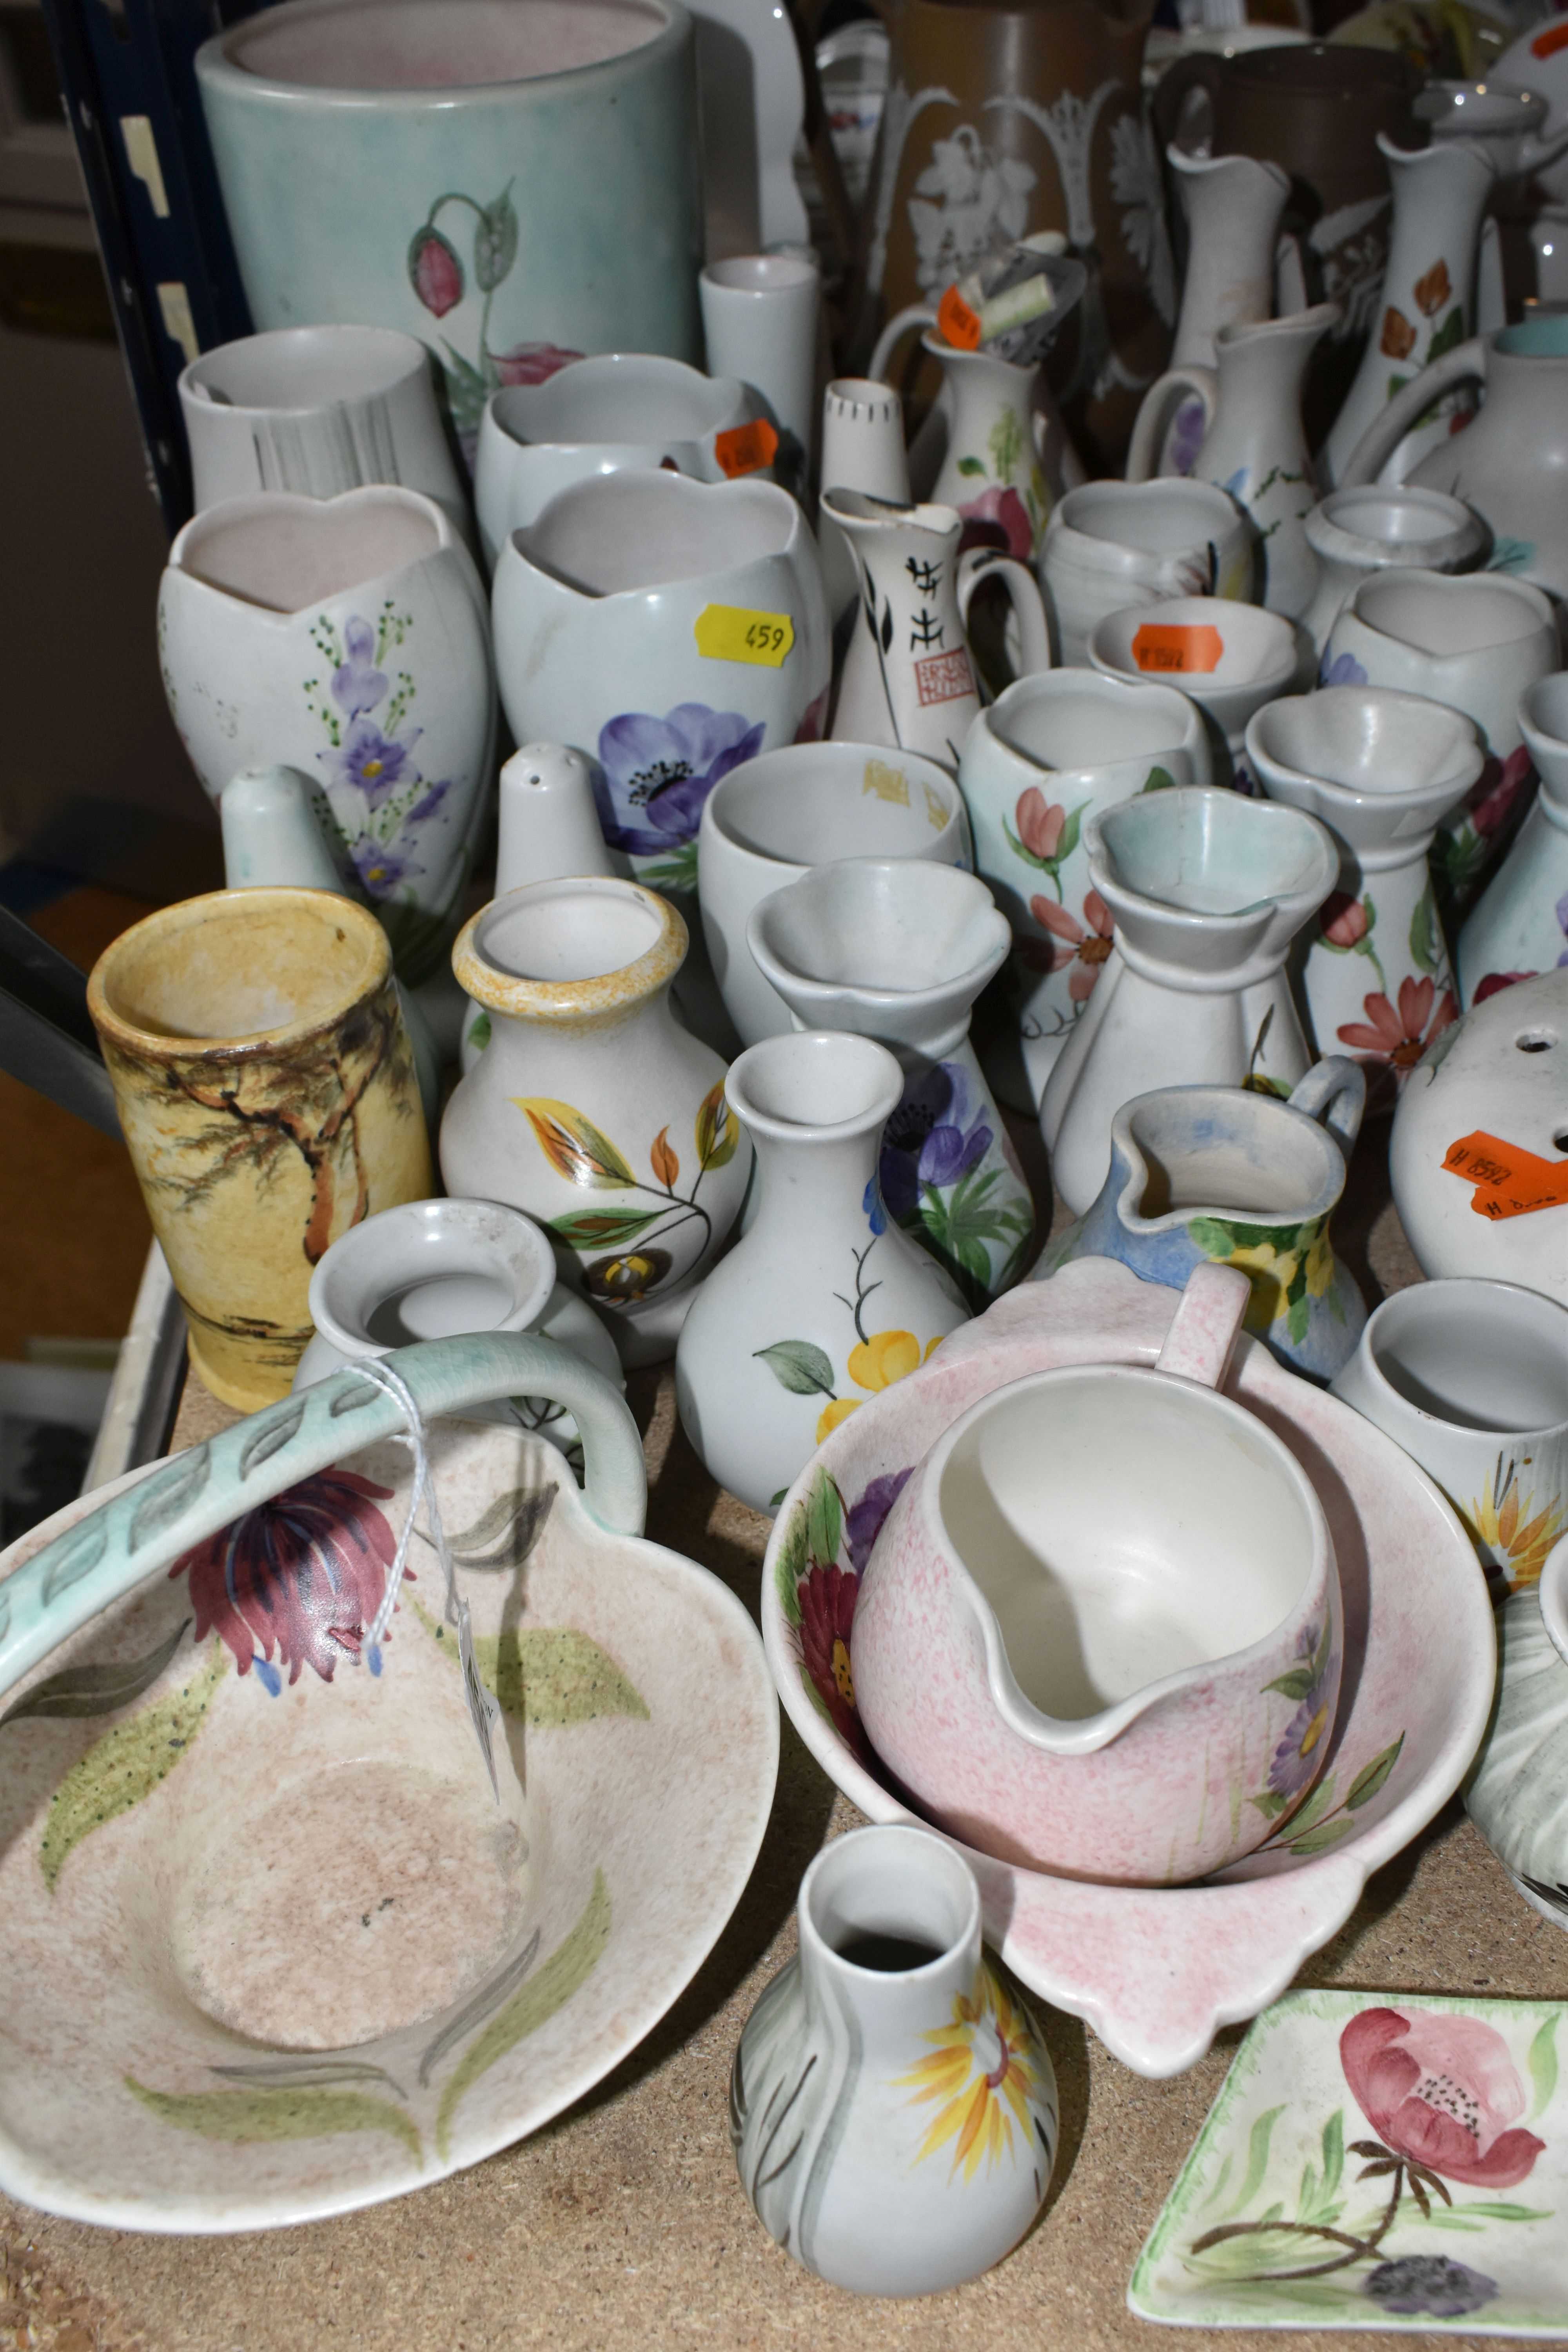 A LARGE QUANTITY OF RADFORD WARE, comprising butter dishes, salt and pepper shakers, bud vases, - Image 2 of 5